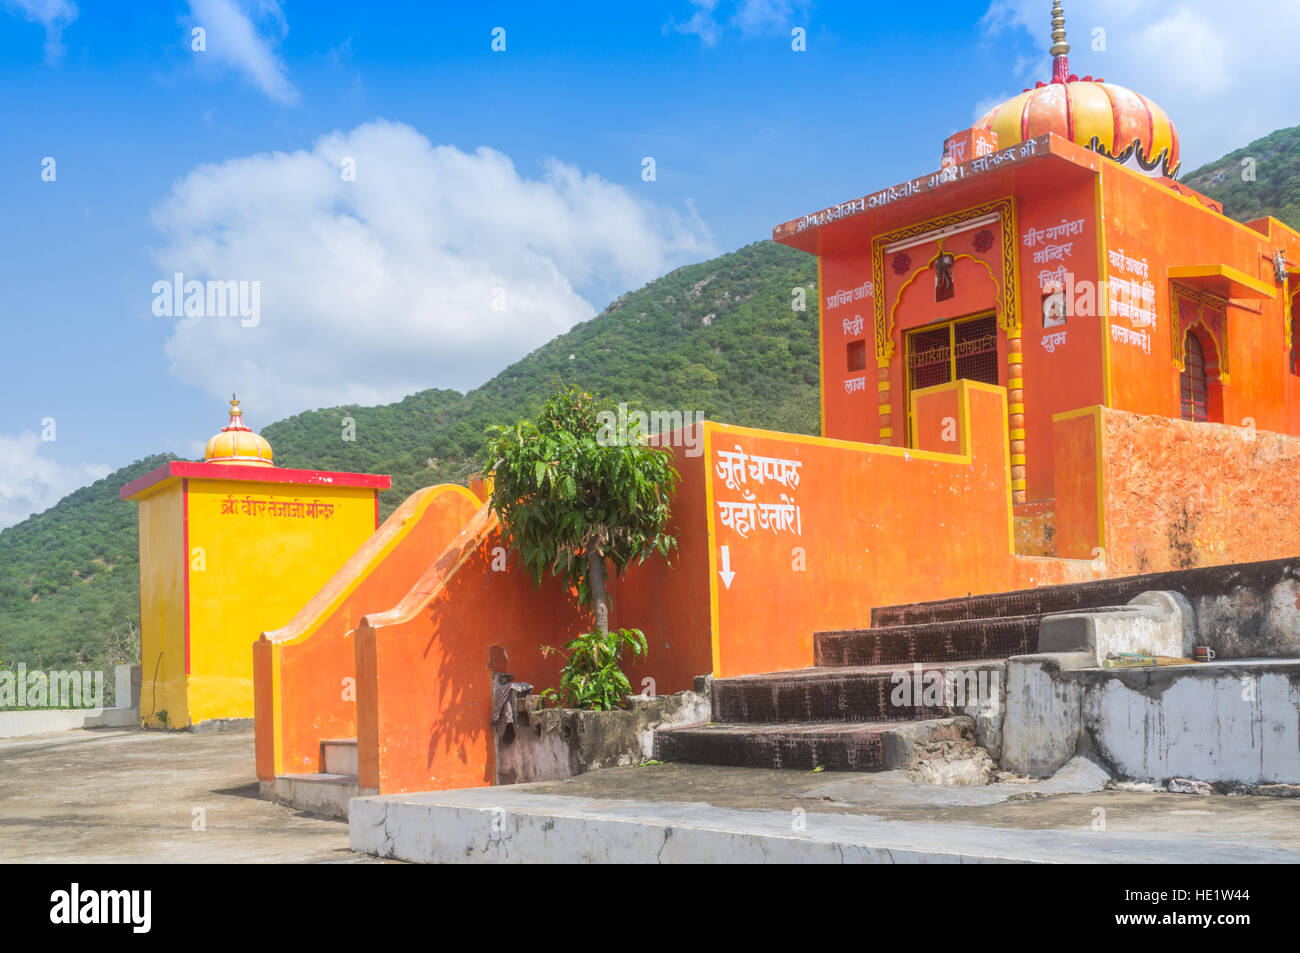 Orange temple building situated just outside Pushkar, Rajasthan, India Stock Photo